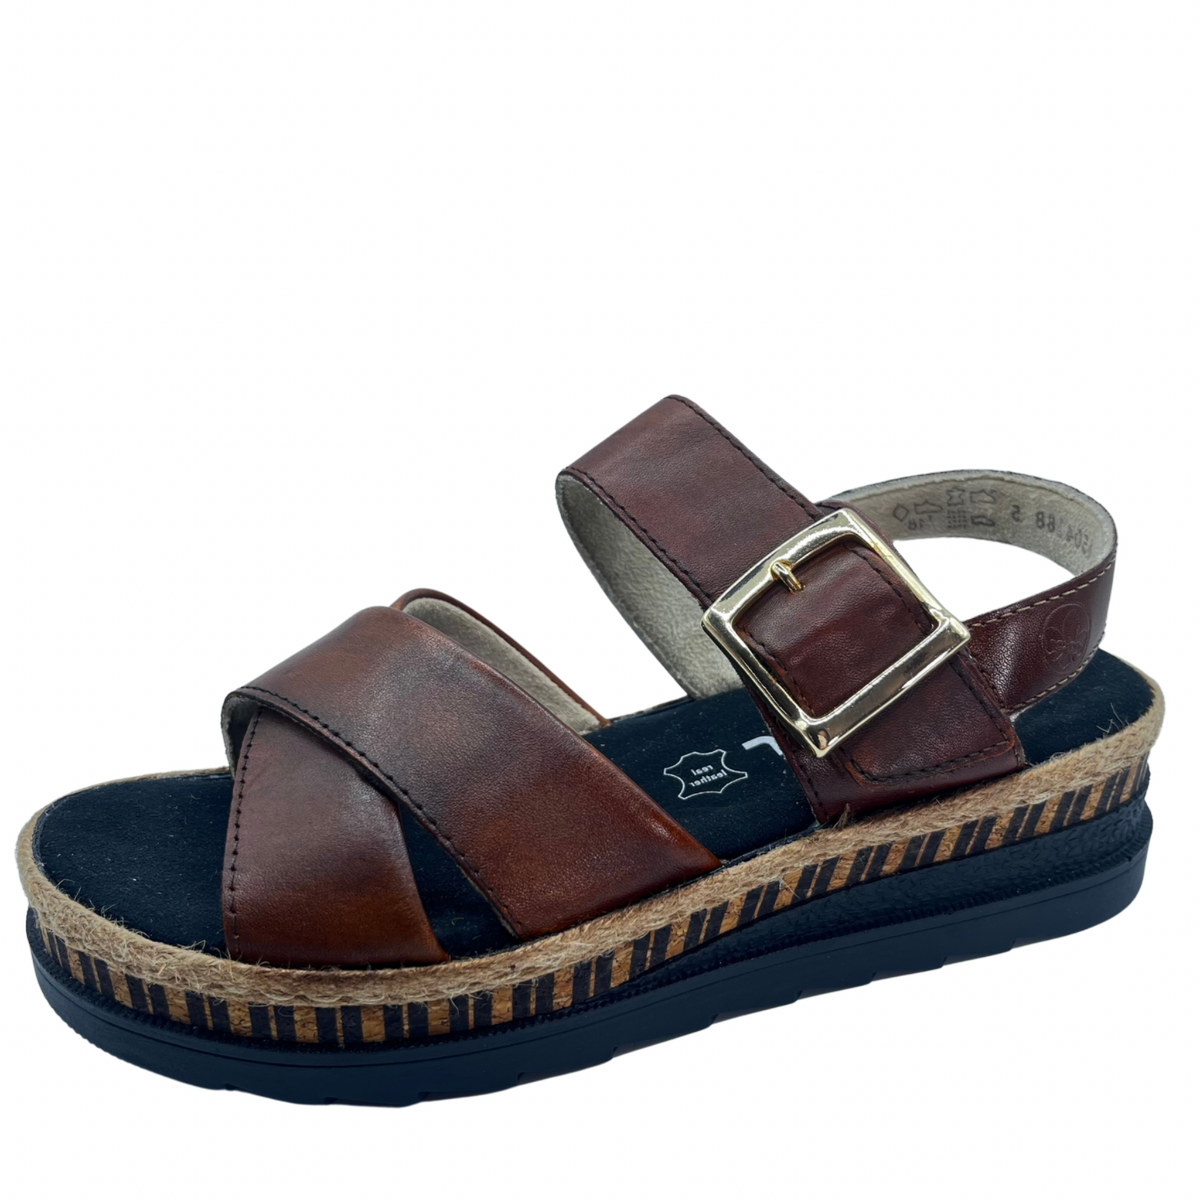 Rieker Brown Leather Crossover Strap Sandals